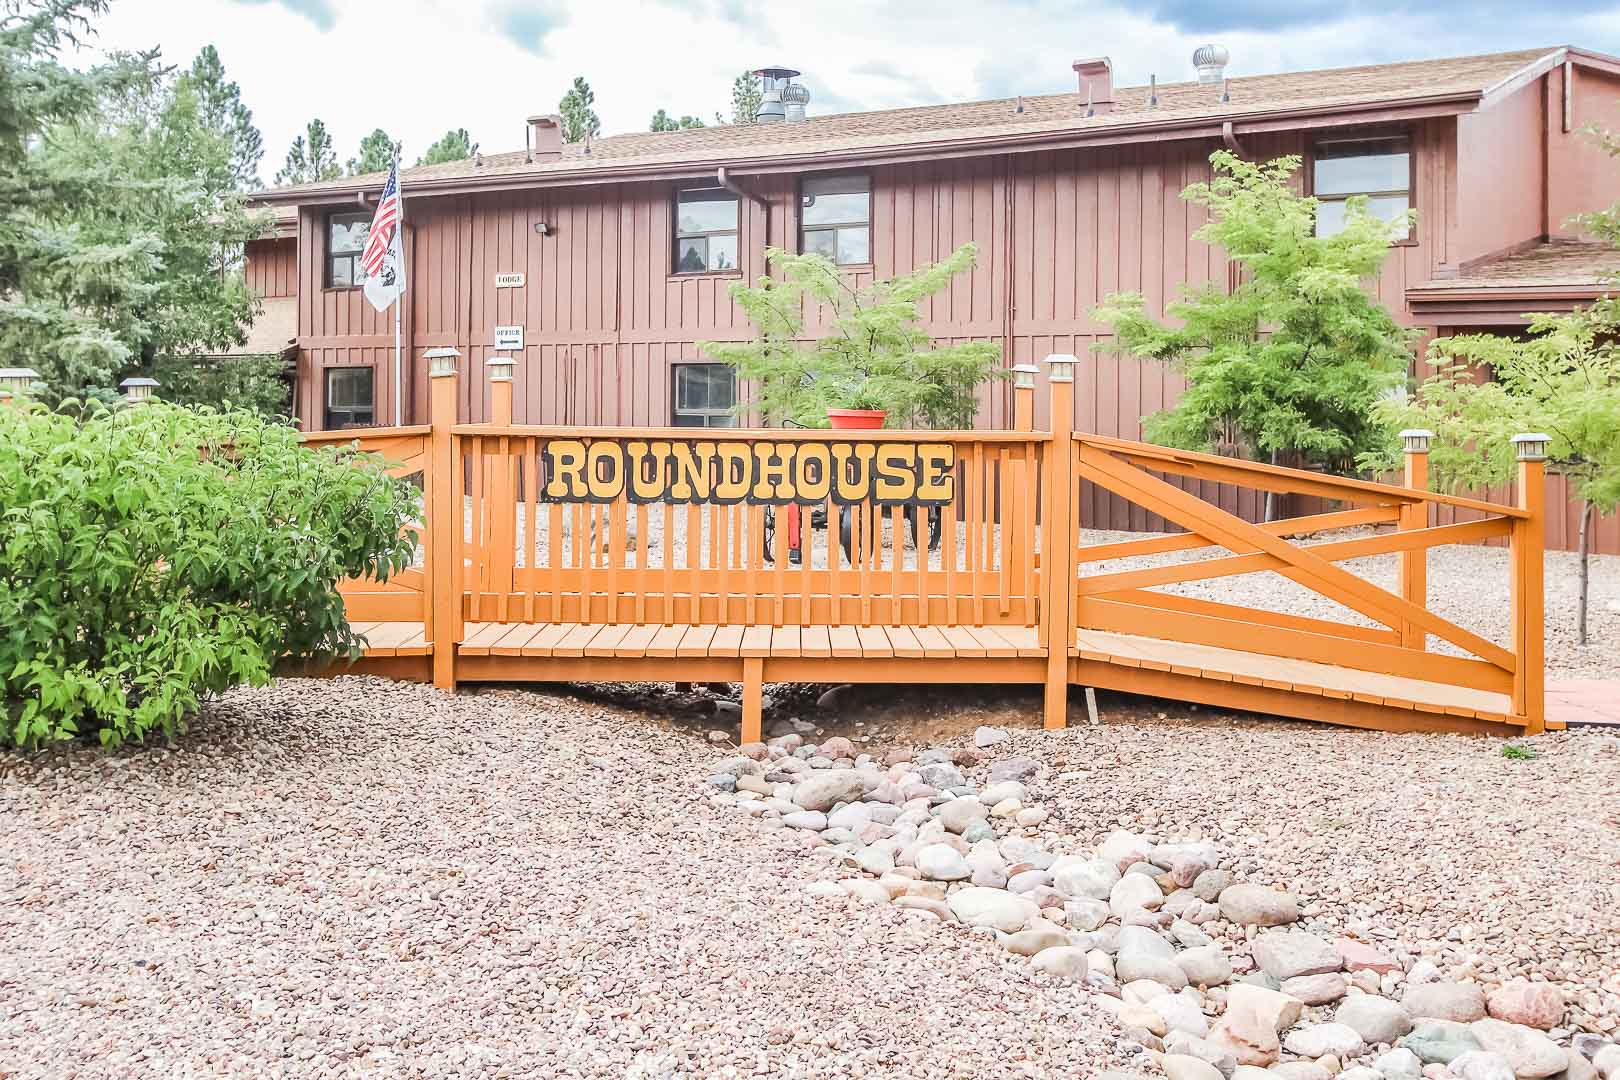 A welcoming resort entrance at VRI's Roundhouse Resort in Pinetop, Arizona.